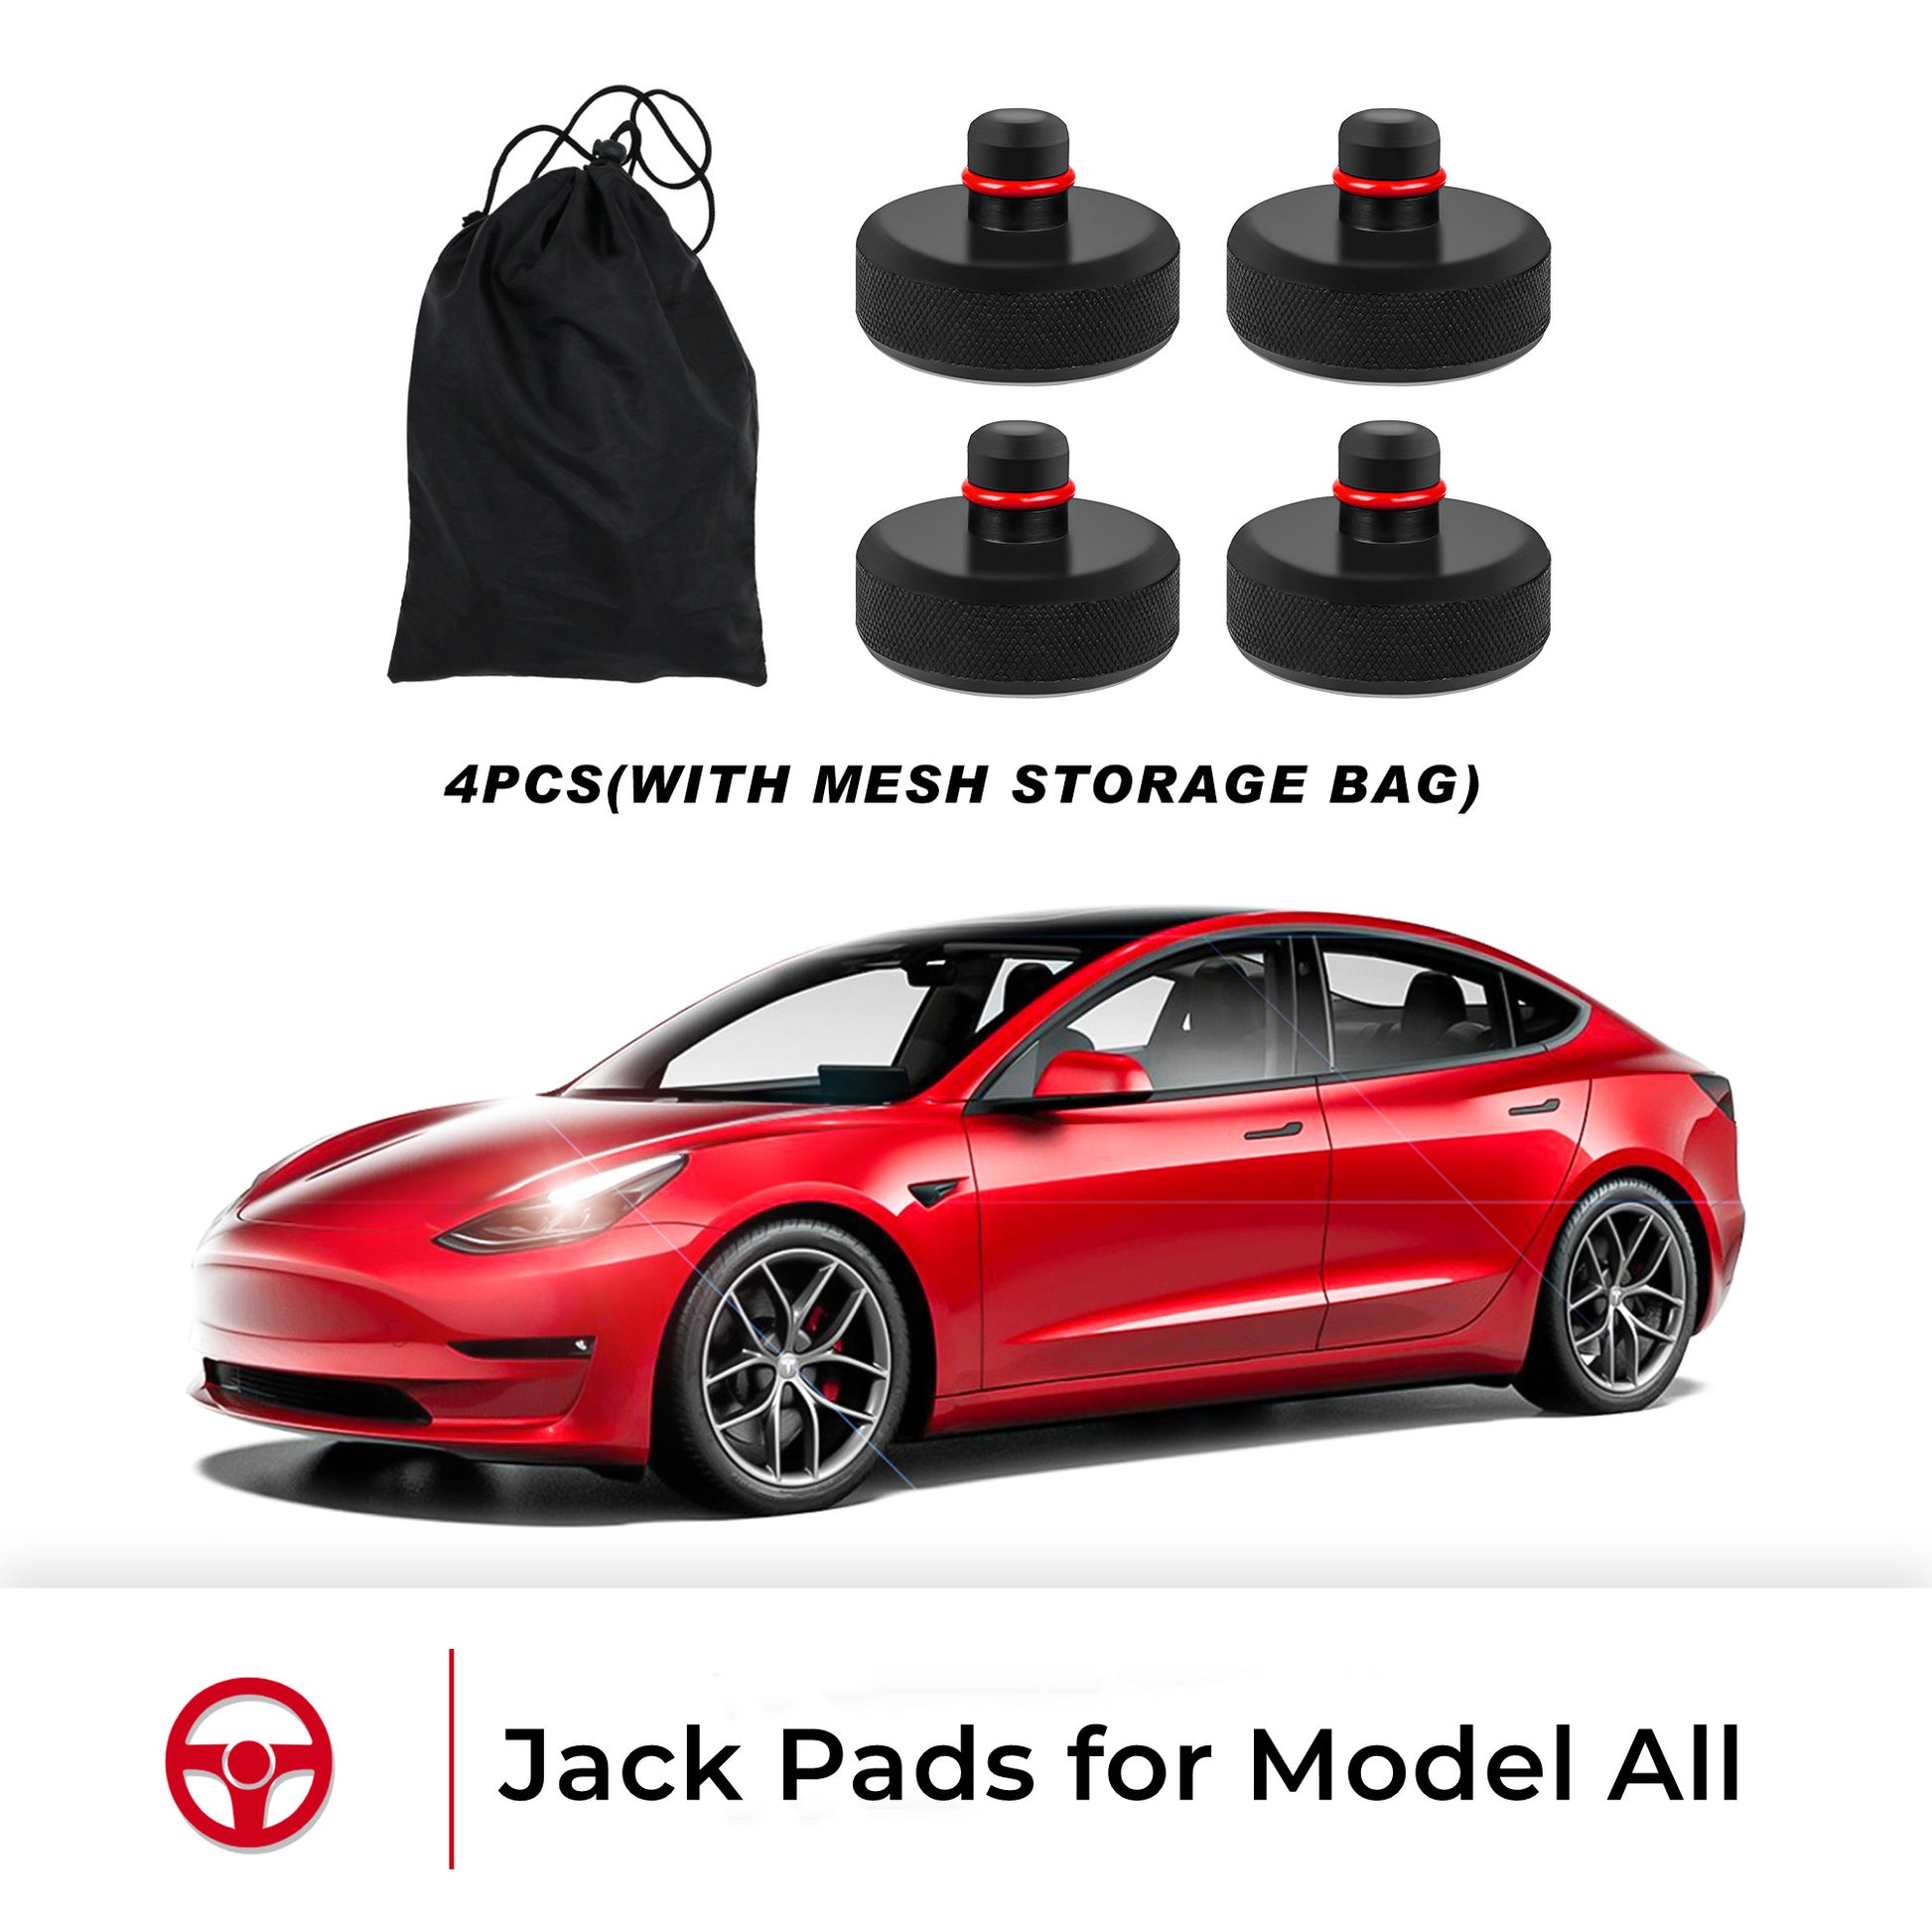 Jack Pad Floor Protects Battery and Paint Adapter with Storage Bag fits for  All Models (4 PCS)